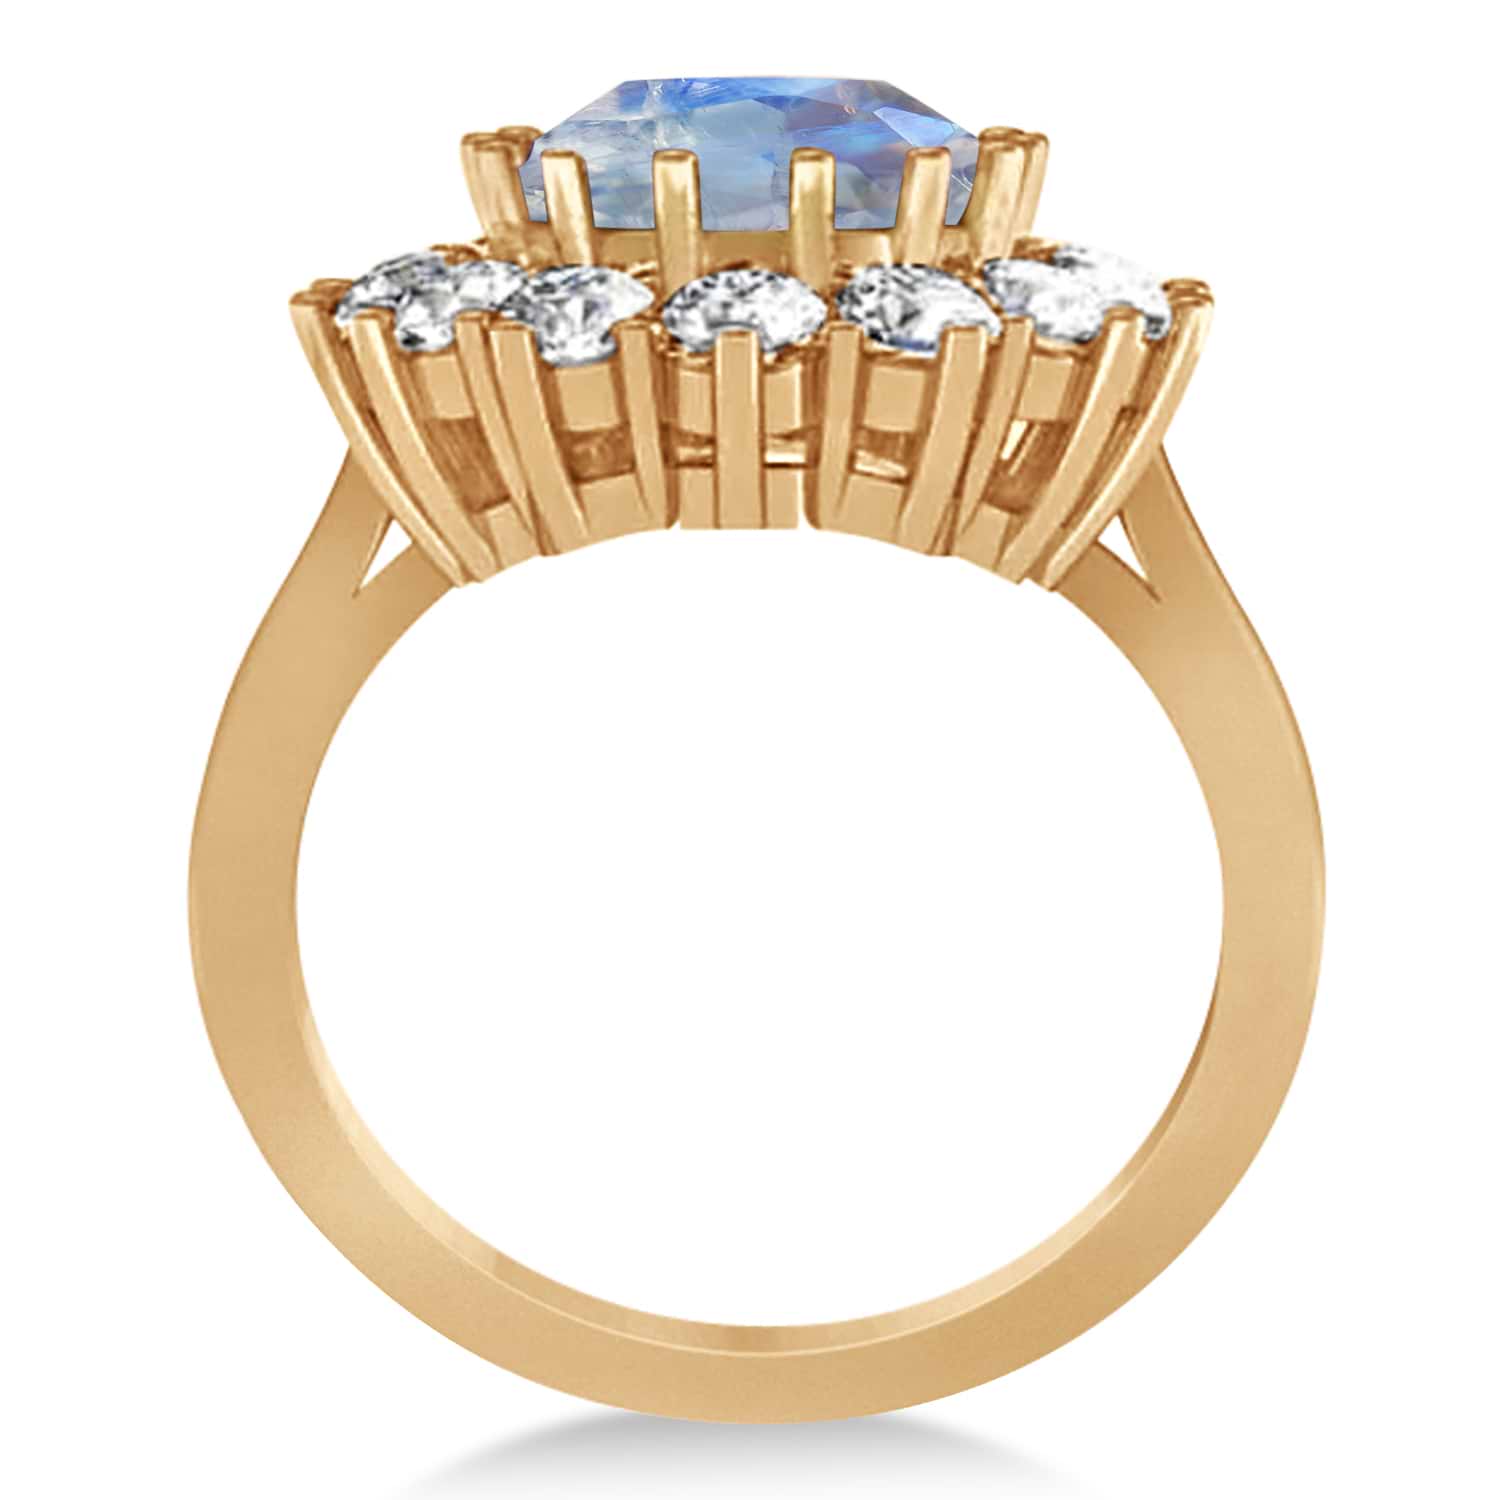 Oval Moonstone & Diamond Accented Ring in 14k Rose Gold (5.40ctw)